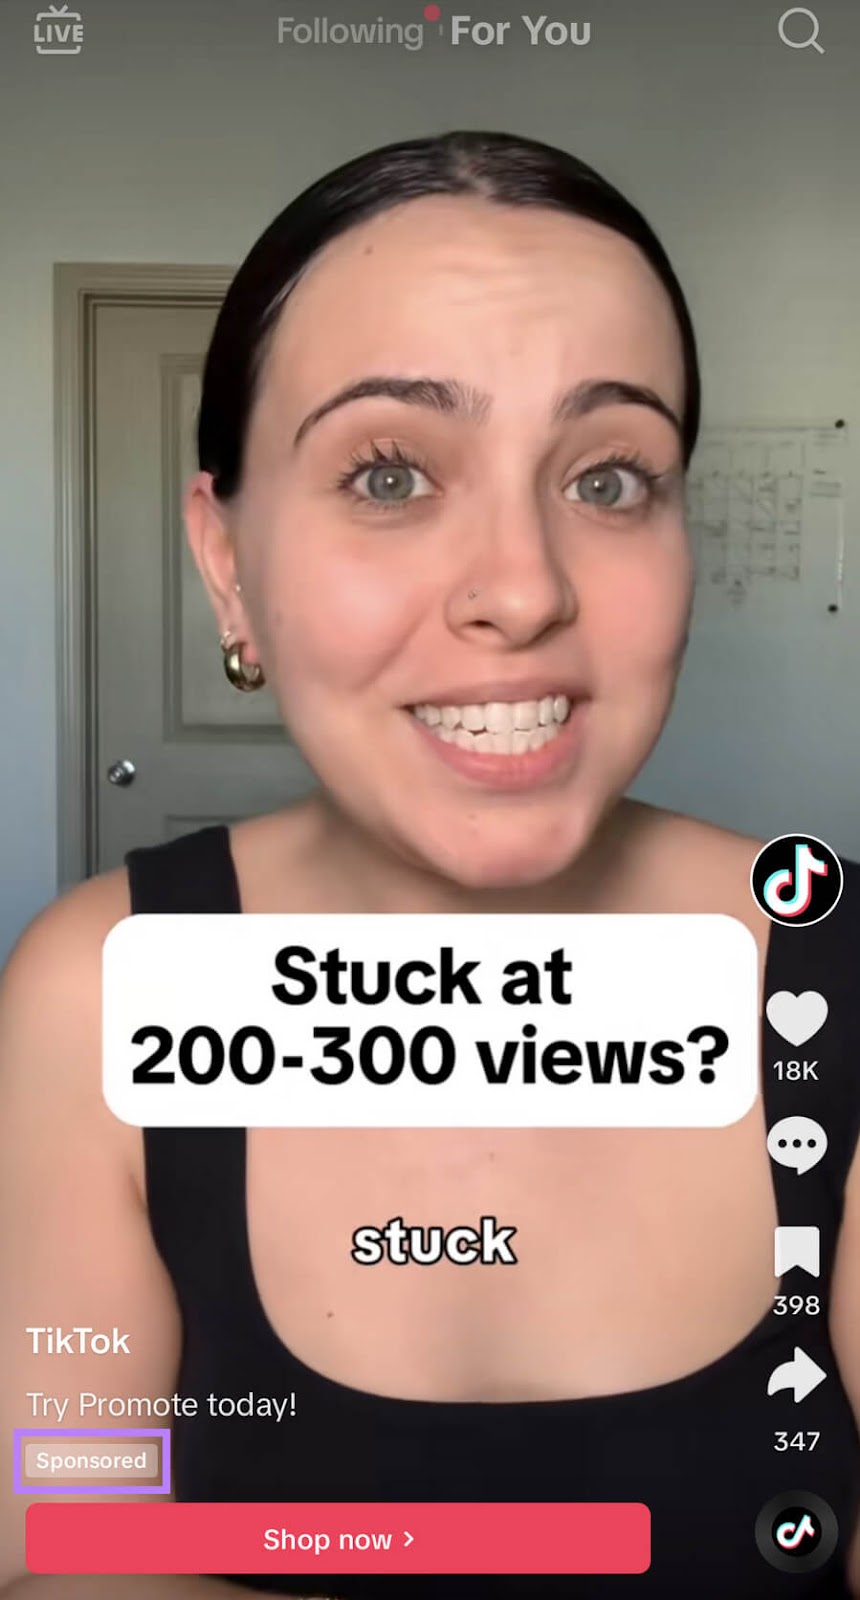 An in-feed ad from TikTok